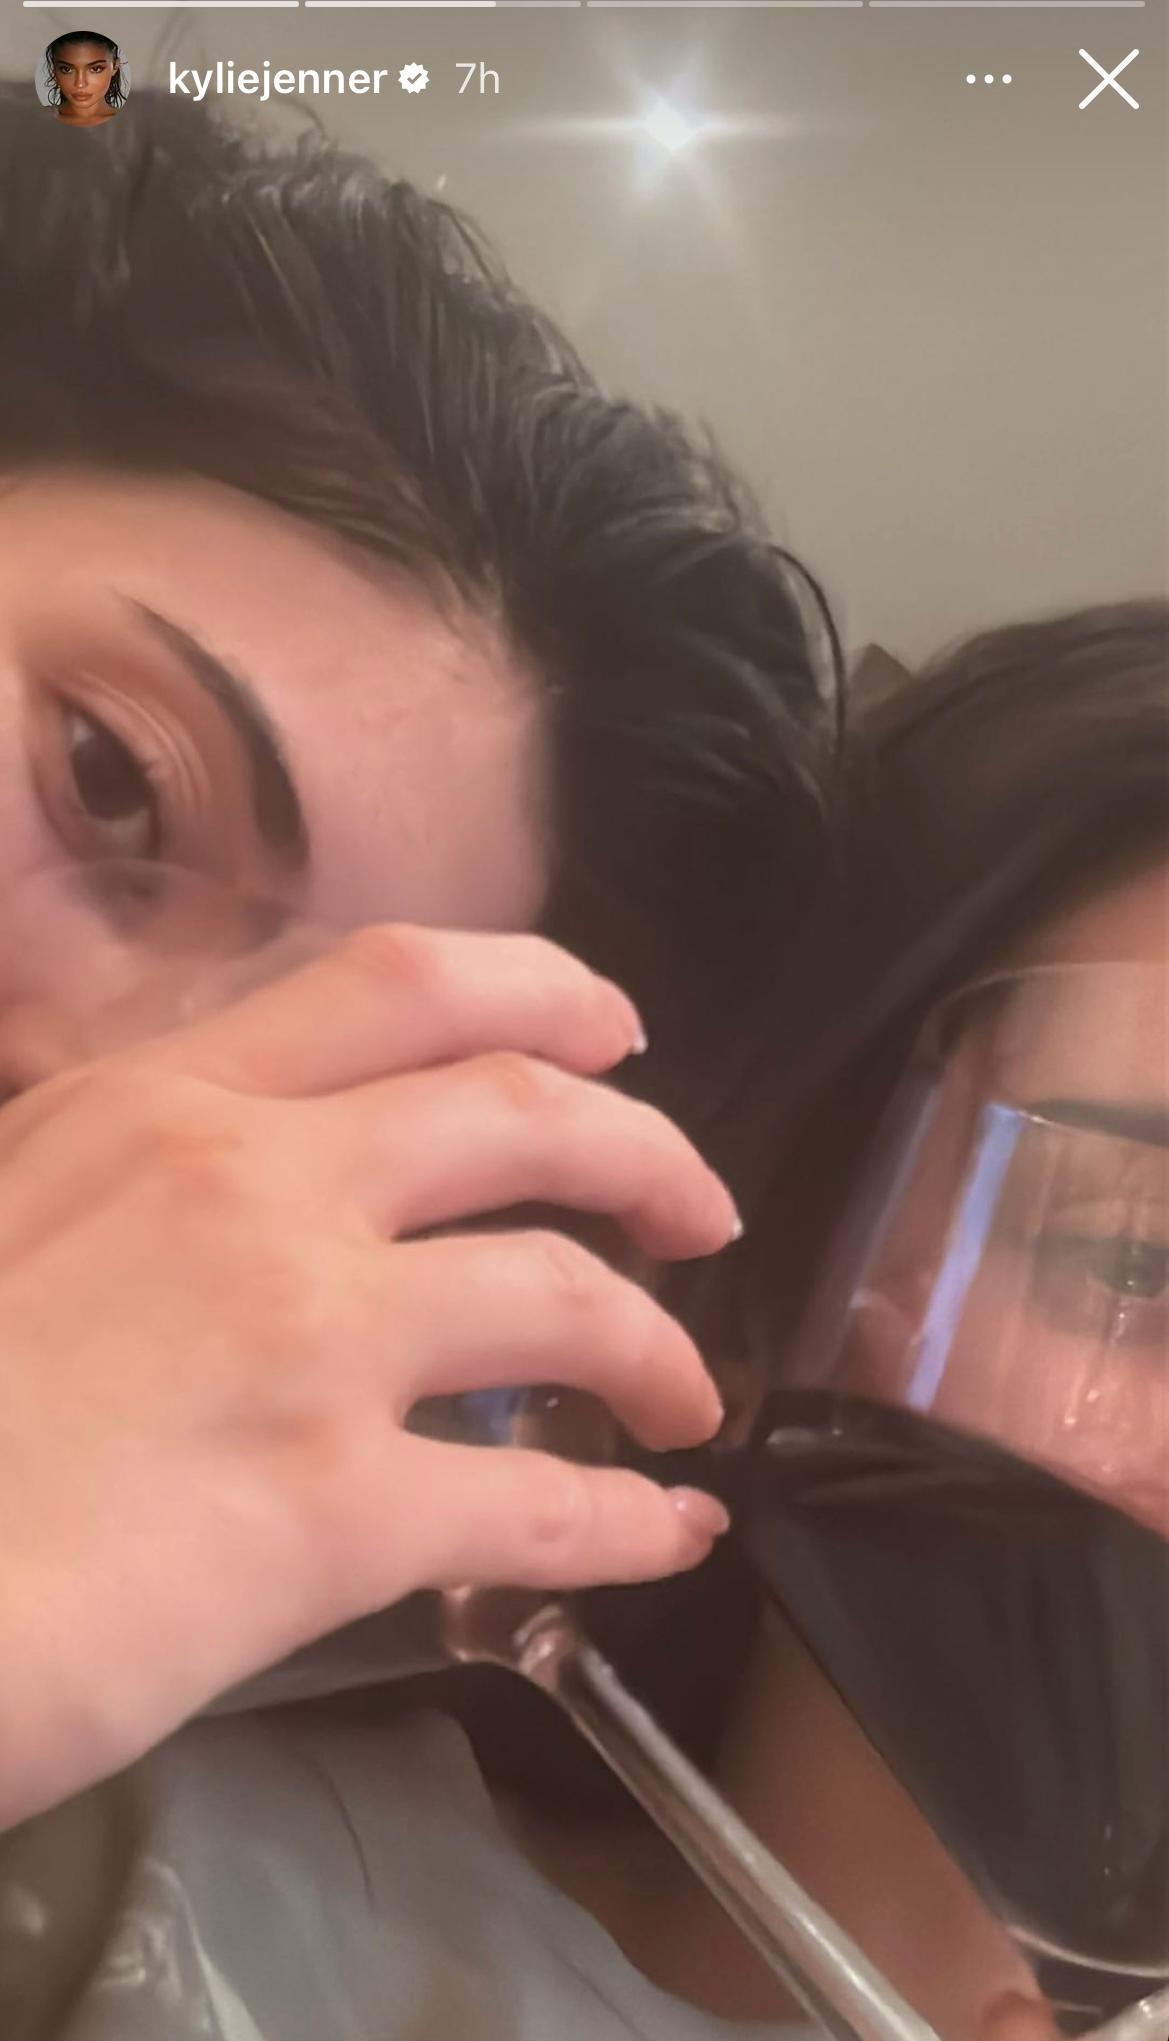 Kylie and Kendall Jenner take playful selfie